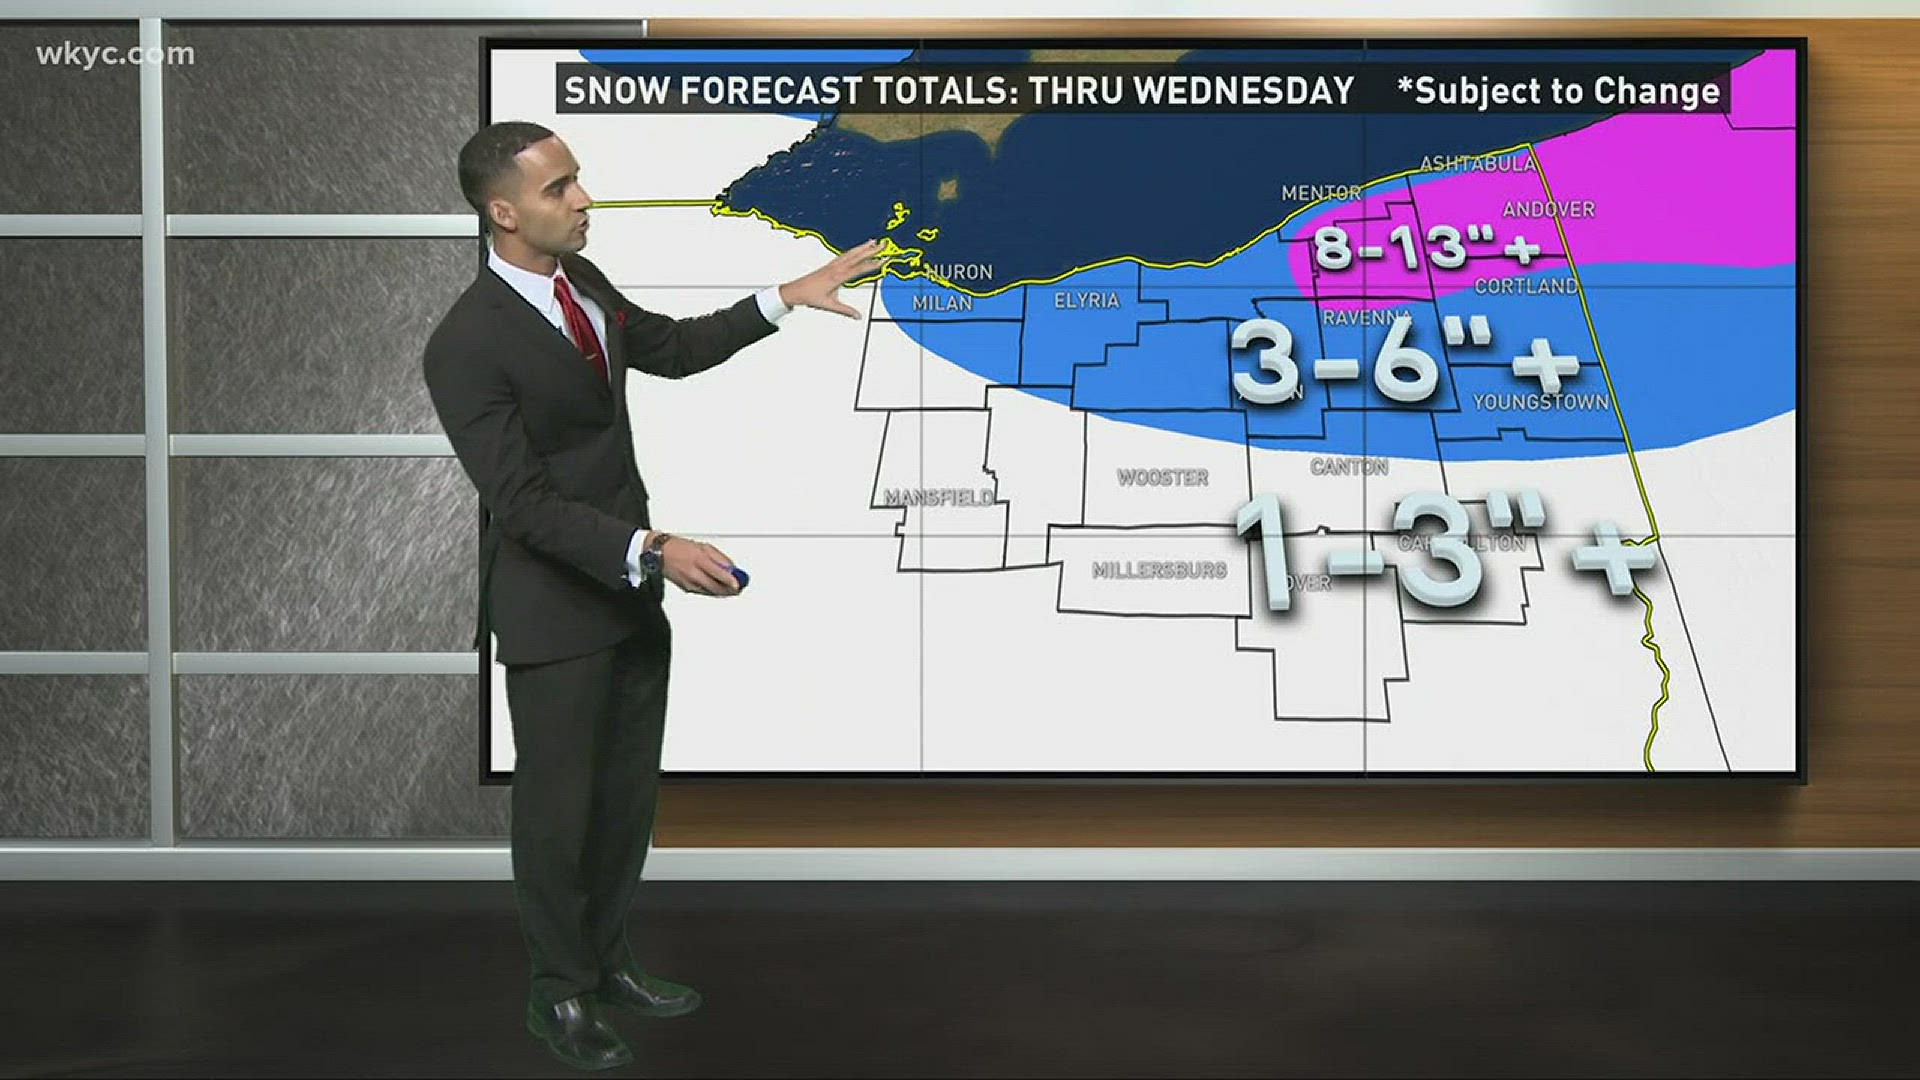 Lake effect snow and clipper system about to hit Northeast Ohio